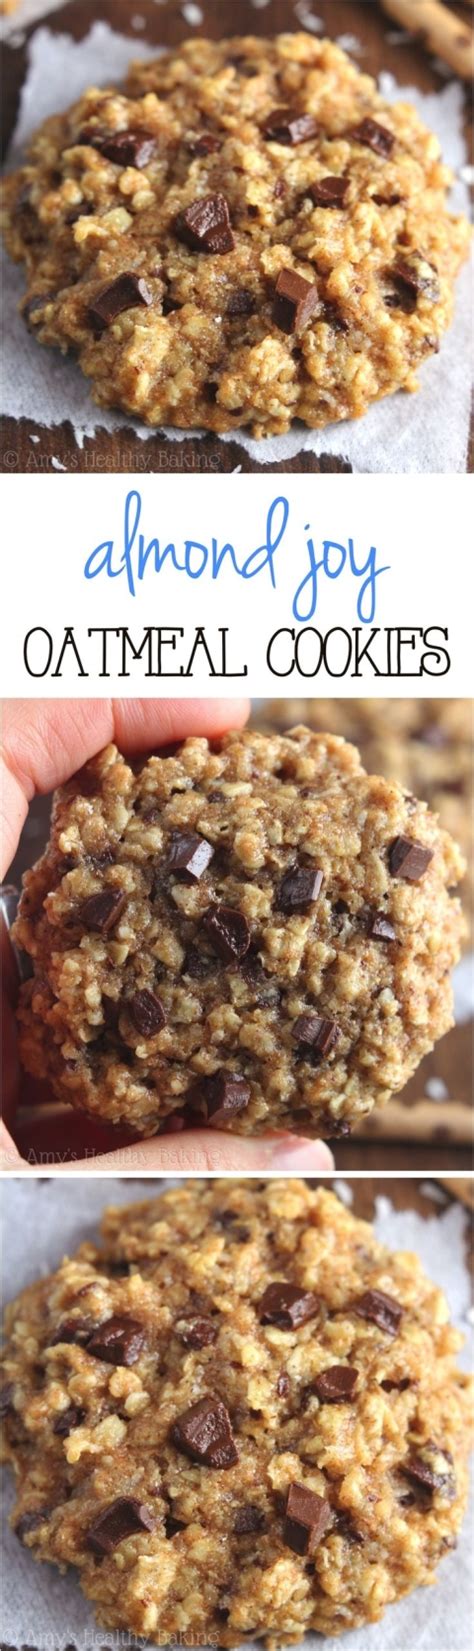 6.scoop spoonfuls of the cookie dough onto the prepared baking sheets. Almond Joy Oatmeal Cookies Recipe | Dessert recipes, Healthy baking